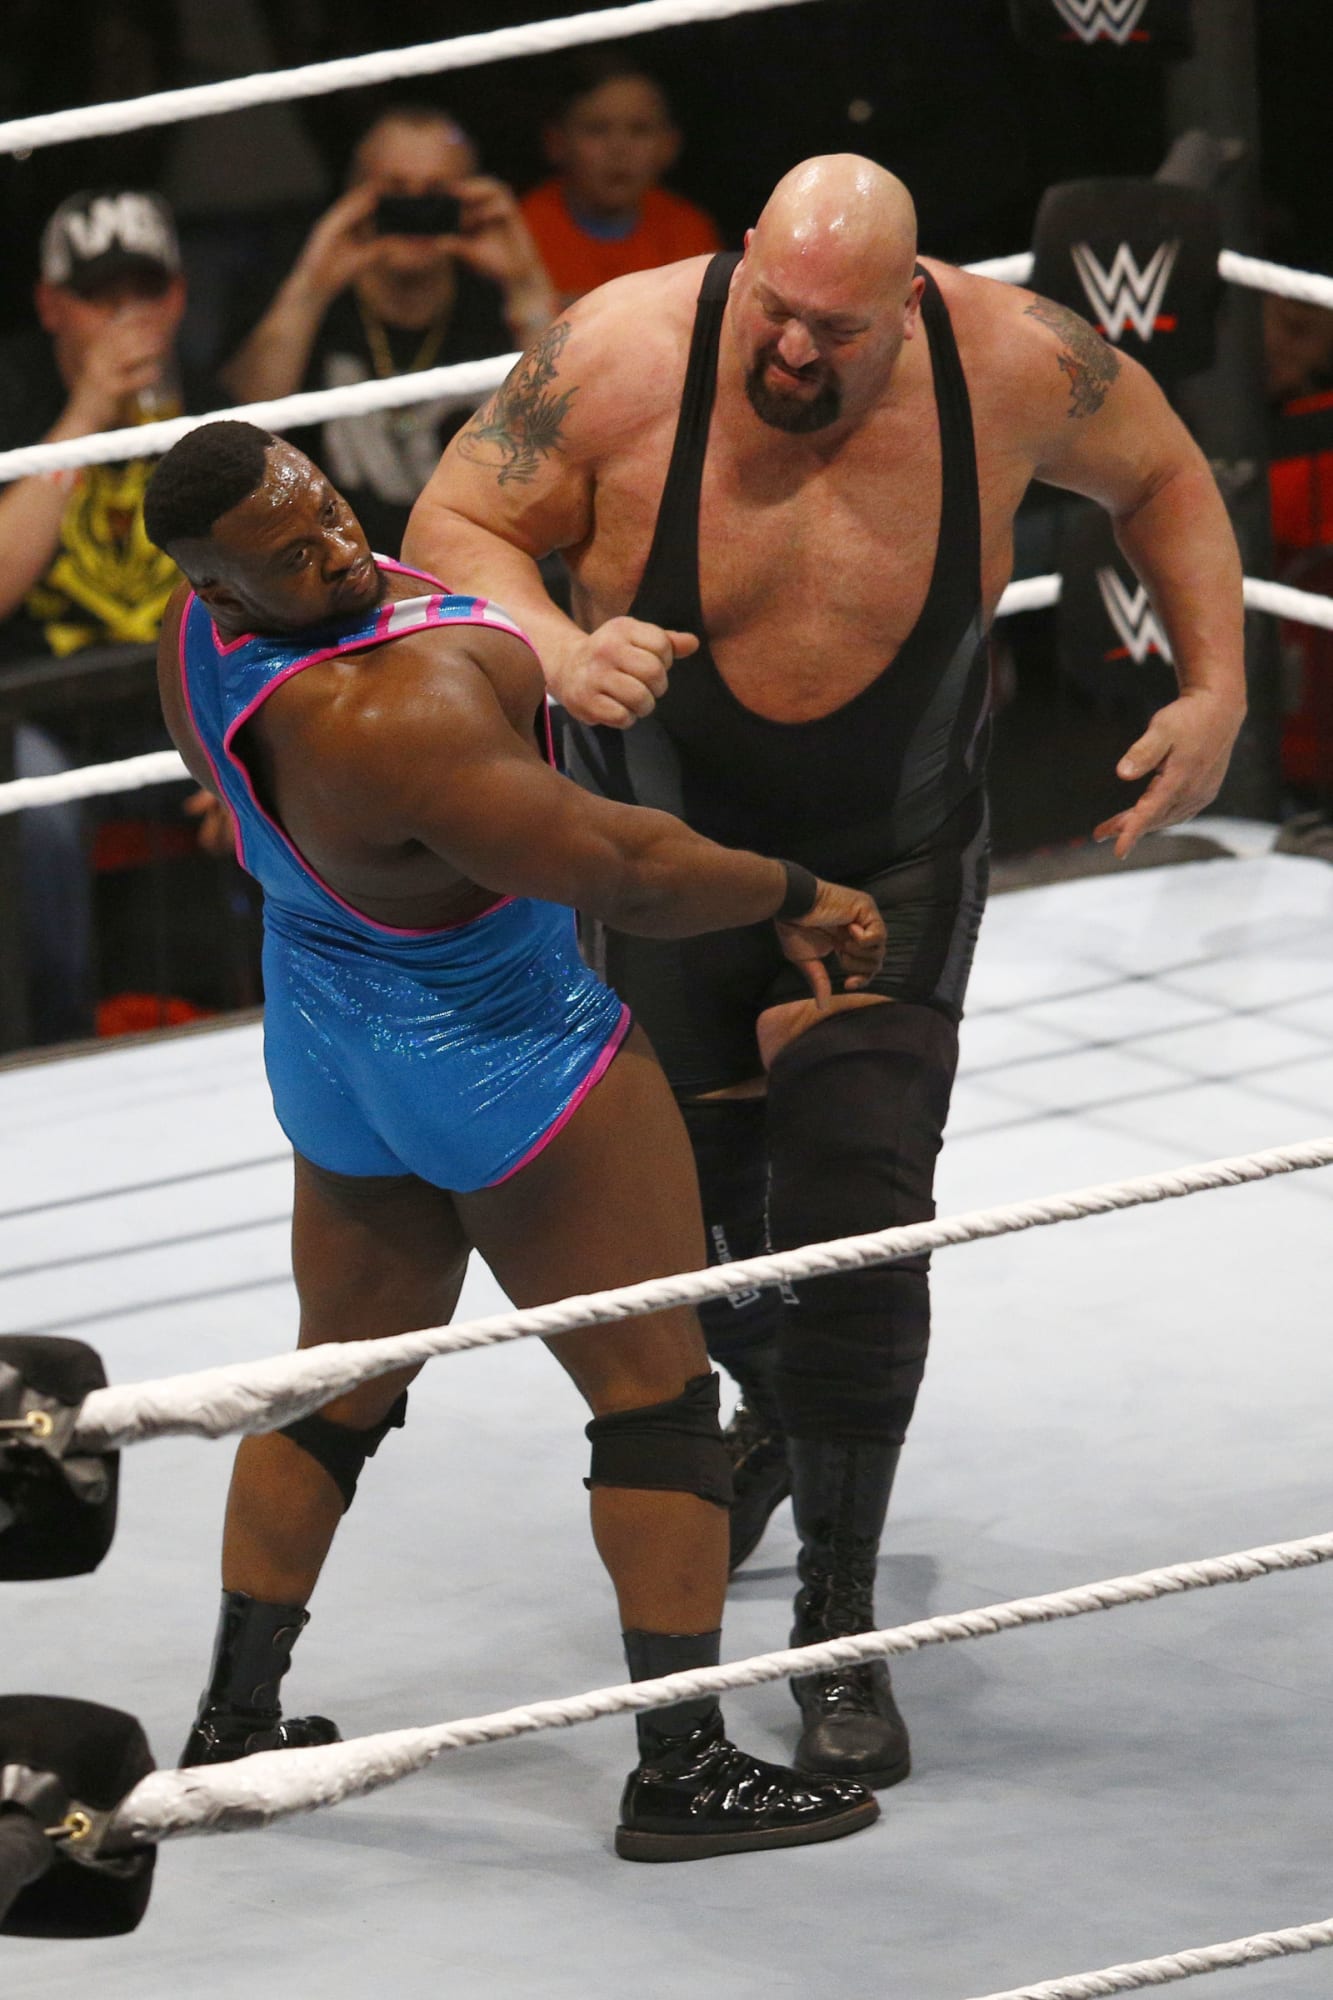 WWE Big Show's polarizing career left opportunity on the table